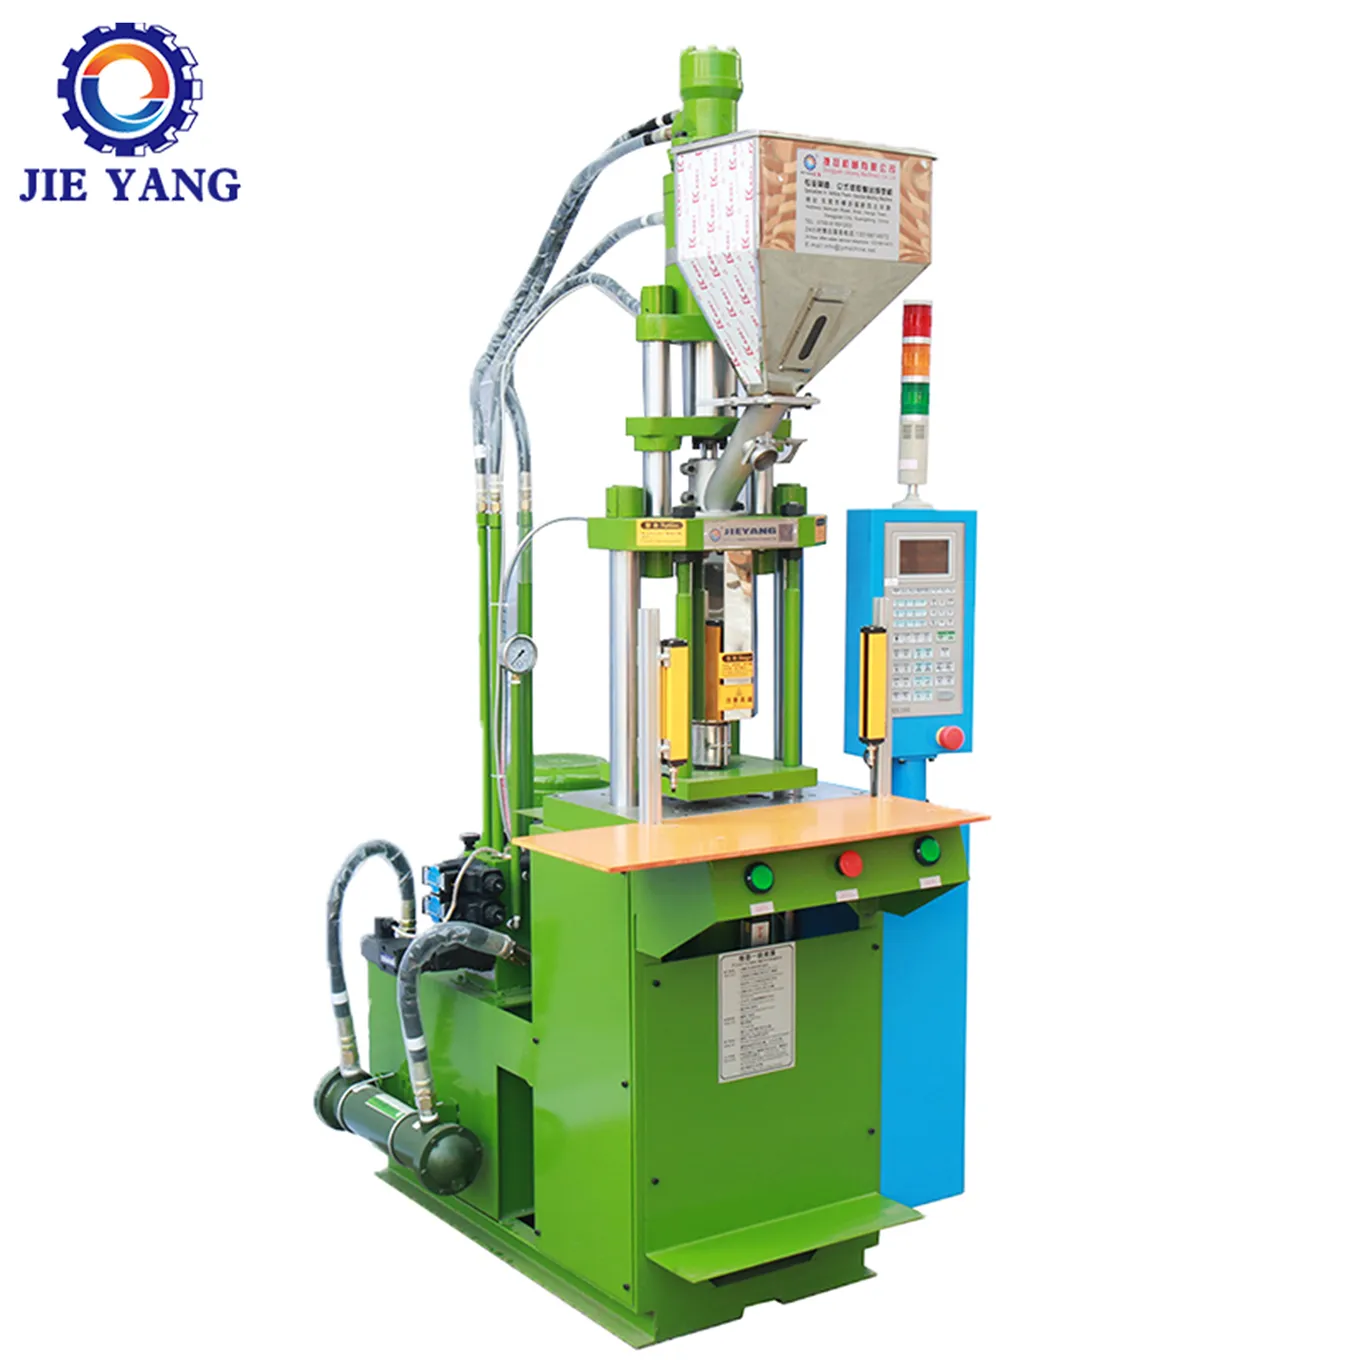 New High Quality 15Tons Vertical Plastic Hand Injection Moulding Machine reticle Crystal head forming machine